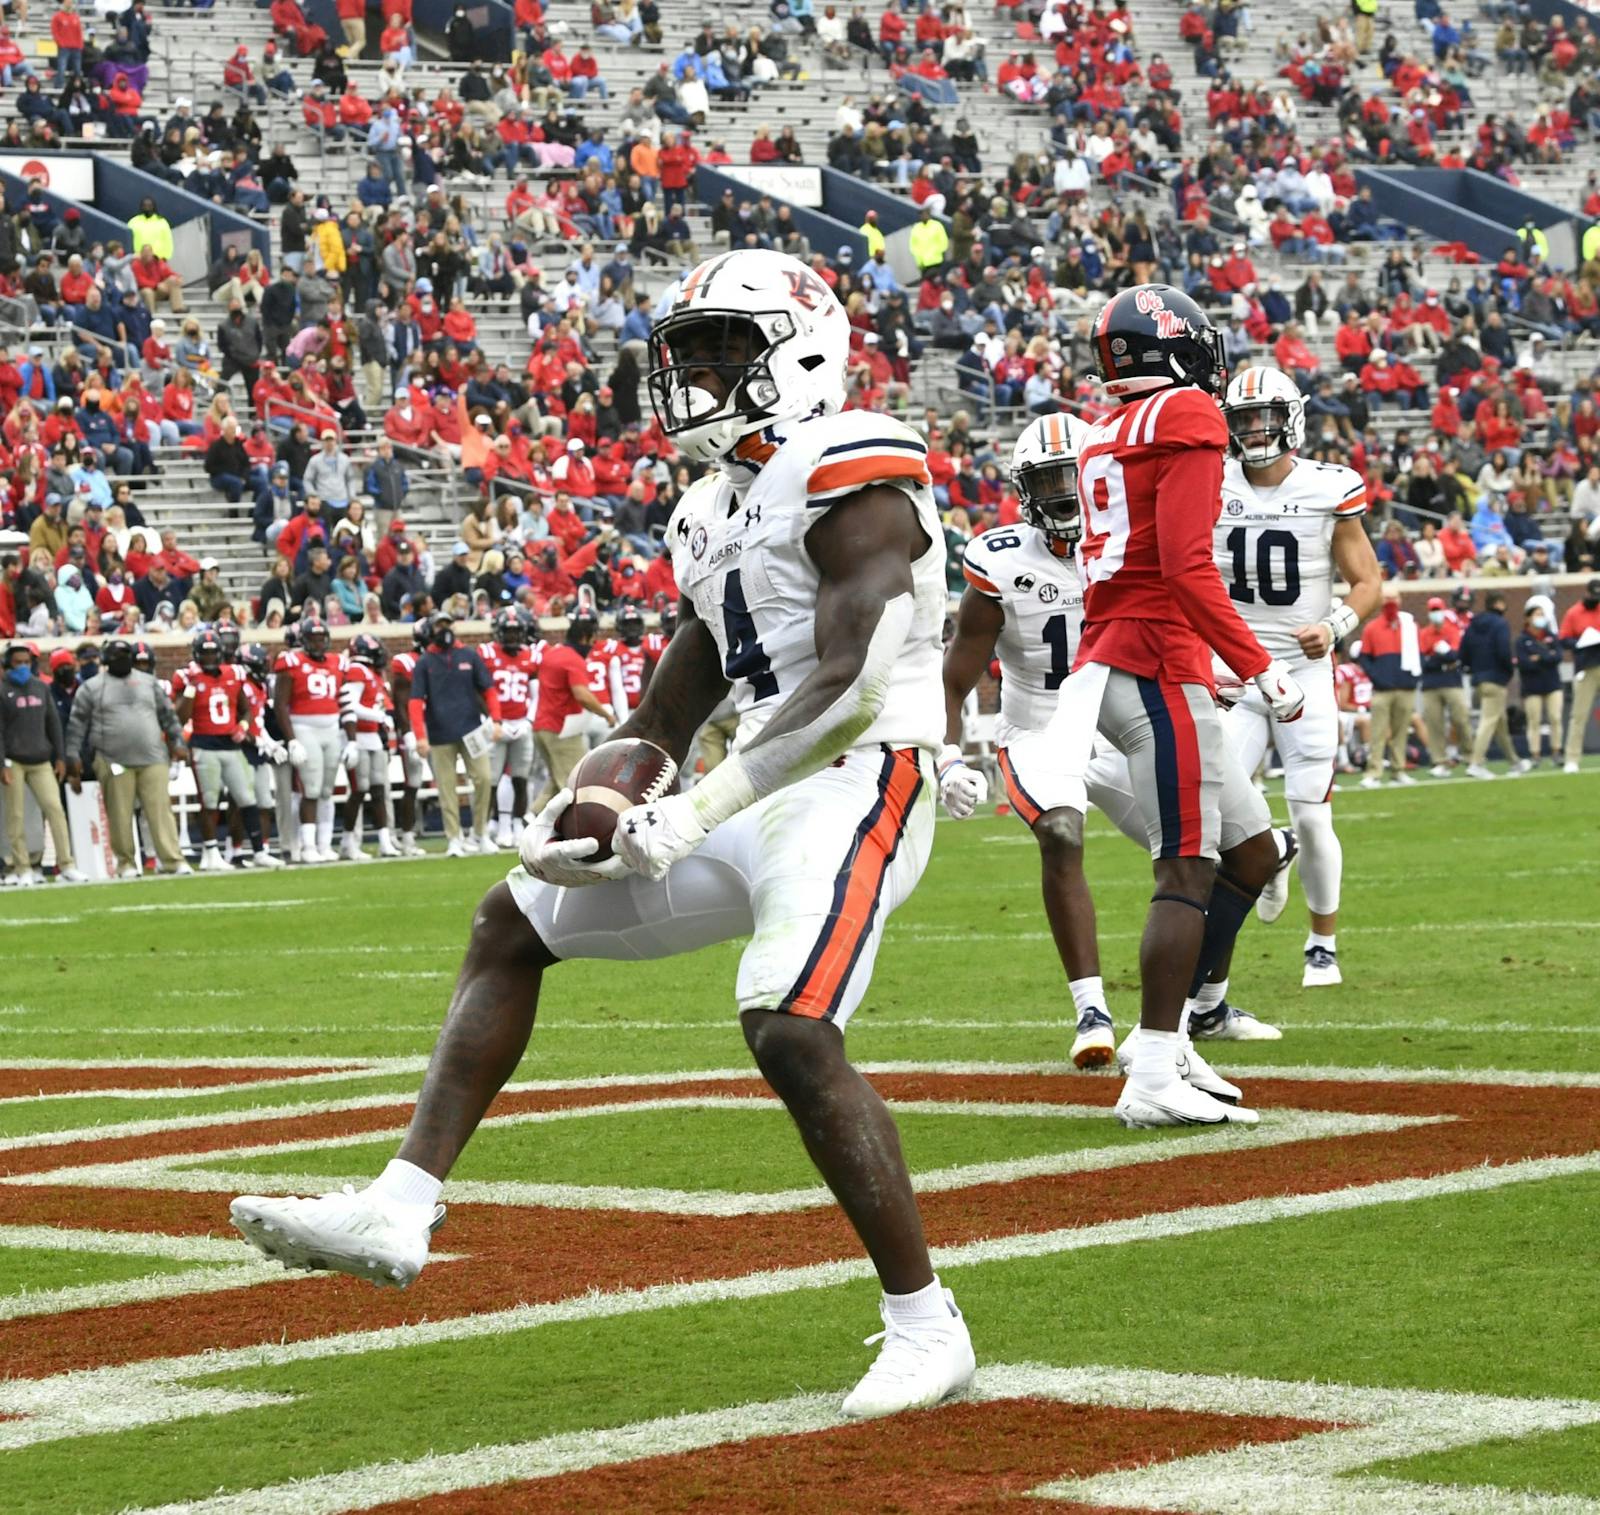 Auburn and Ole Miss set to battle in first ranked matchup since 2014